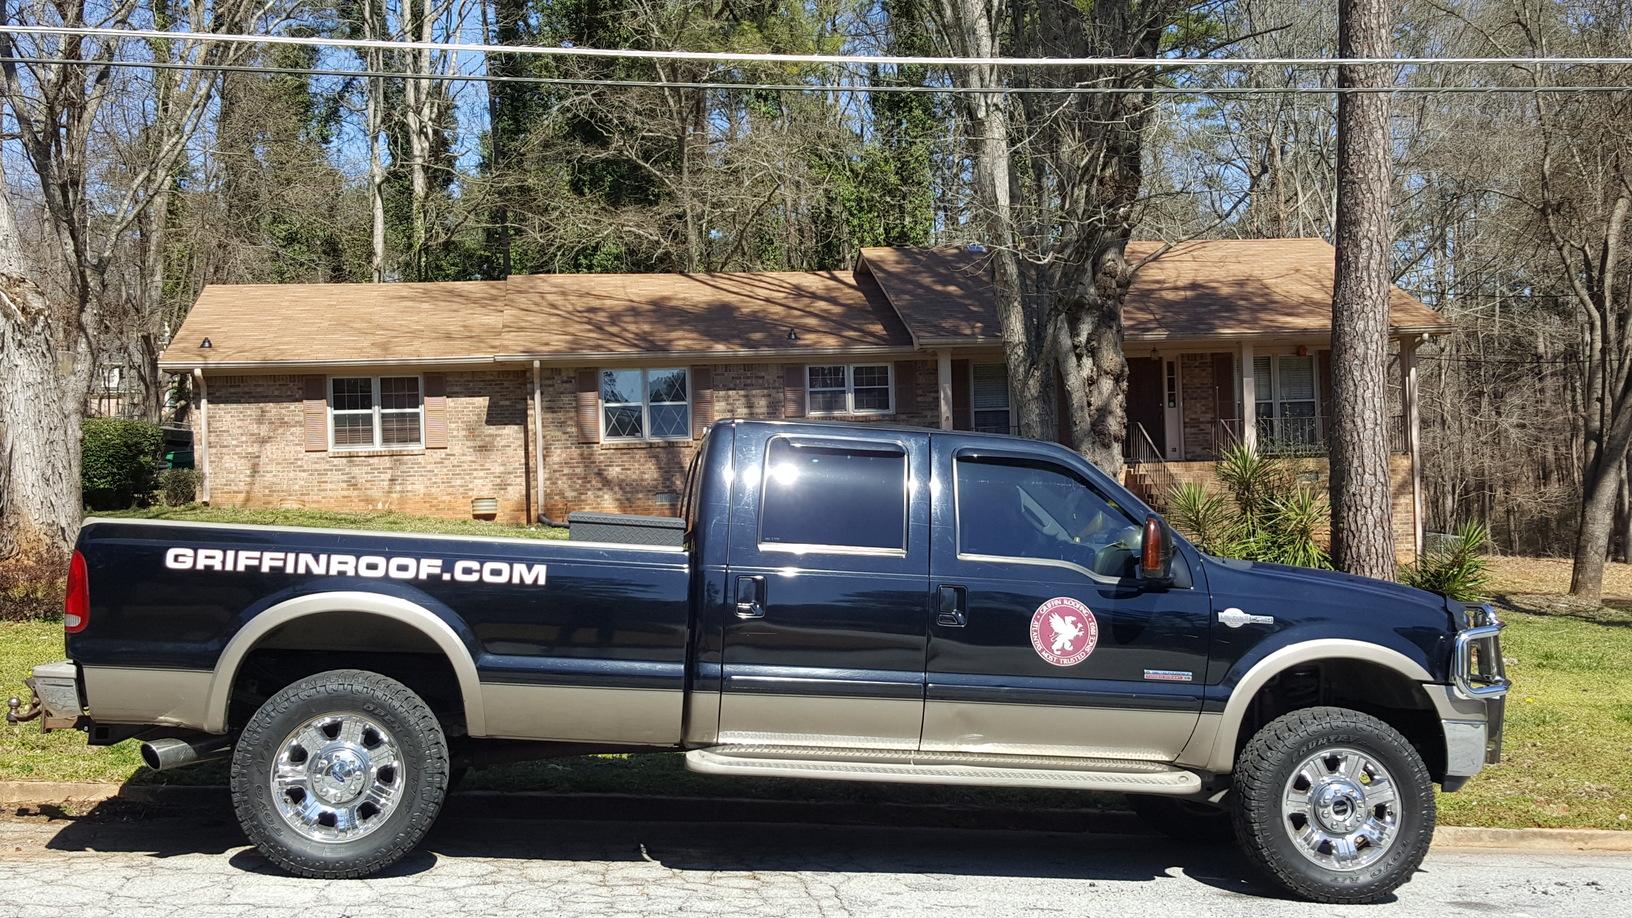 Griffin Roofing in Atlanta, GA - New Roof Replacement in Lithonia, GA